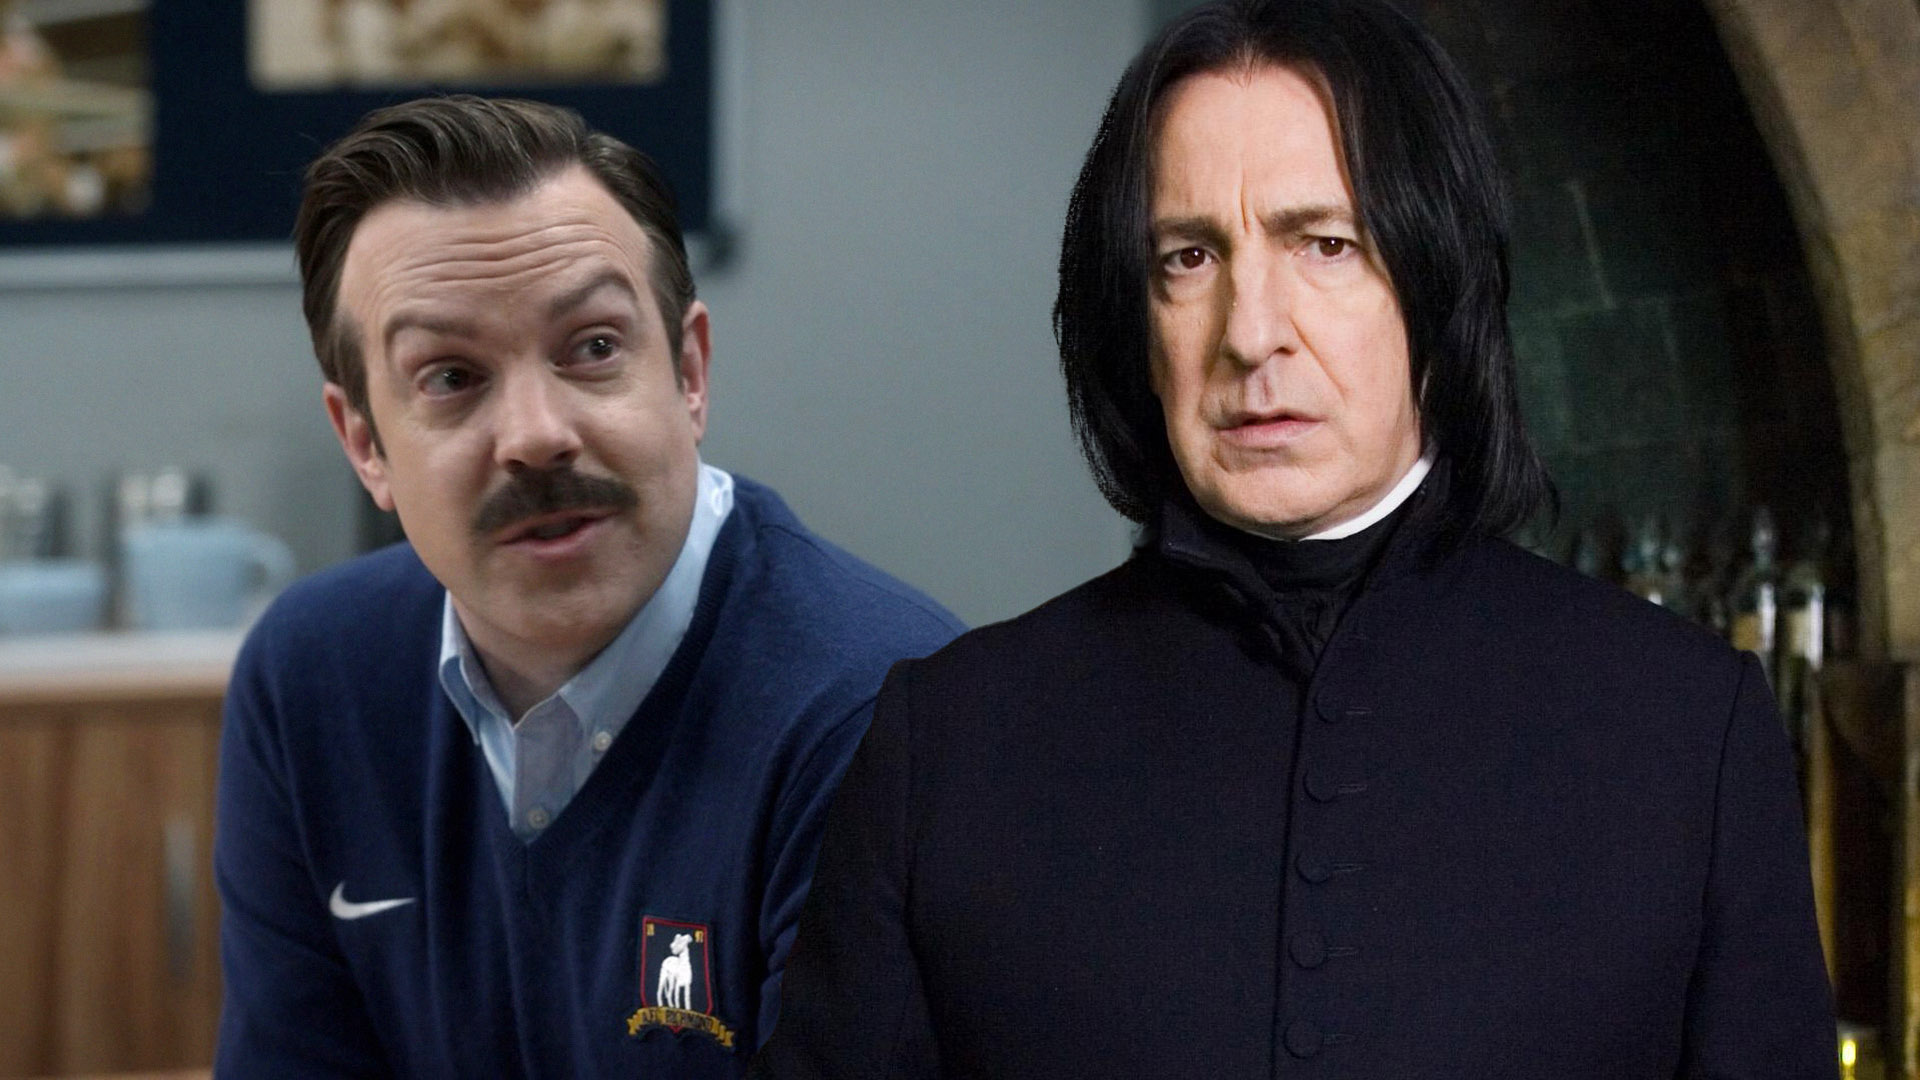 Harry Potter TV Reboot Should Cast This Ted Lasso Star as Snape ASAP